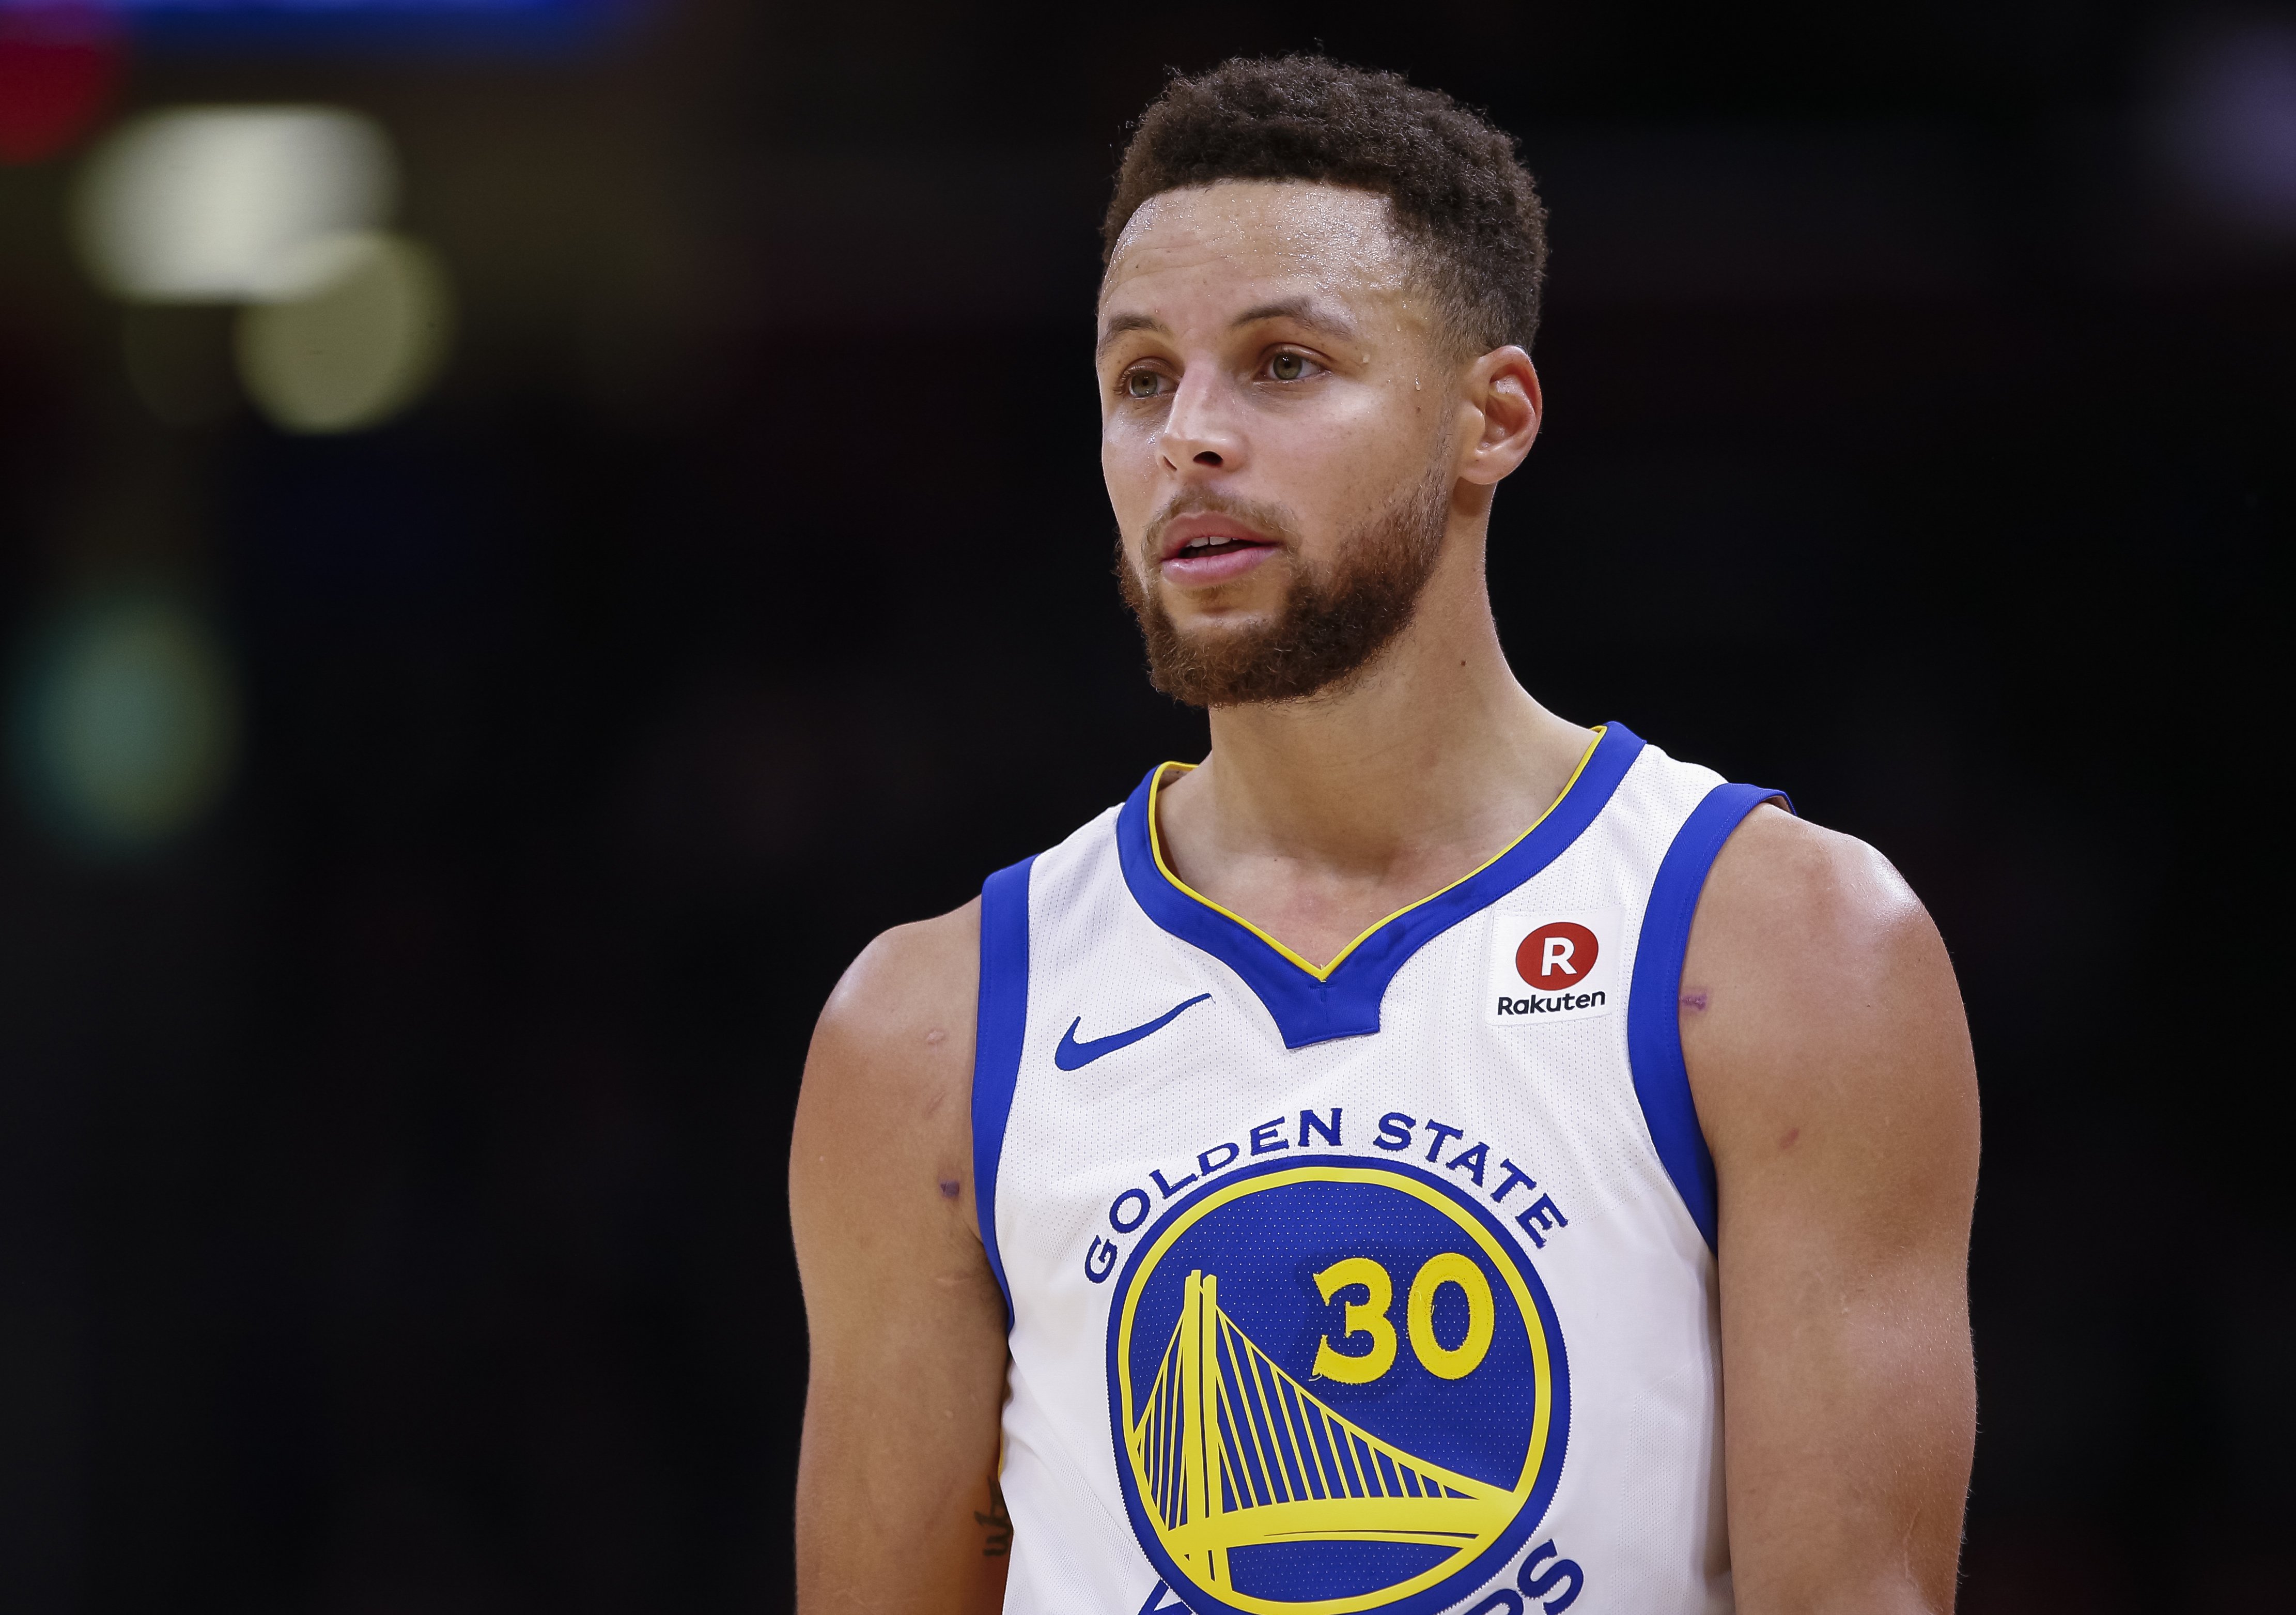 Stephen Curry #30 of the Golden State Warriors is seen during the game against the Cleveland Cavaliers at Quicken Loans Arena on January 15, 2018 in Cleveland, Ohio | Photo: GettyImages